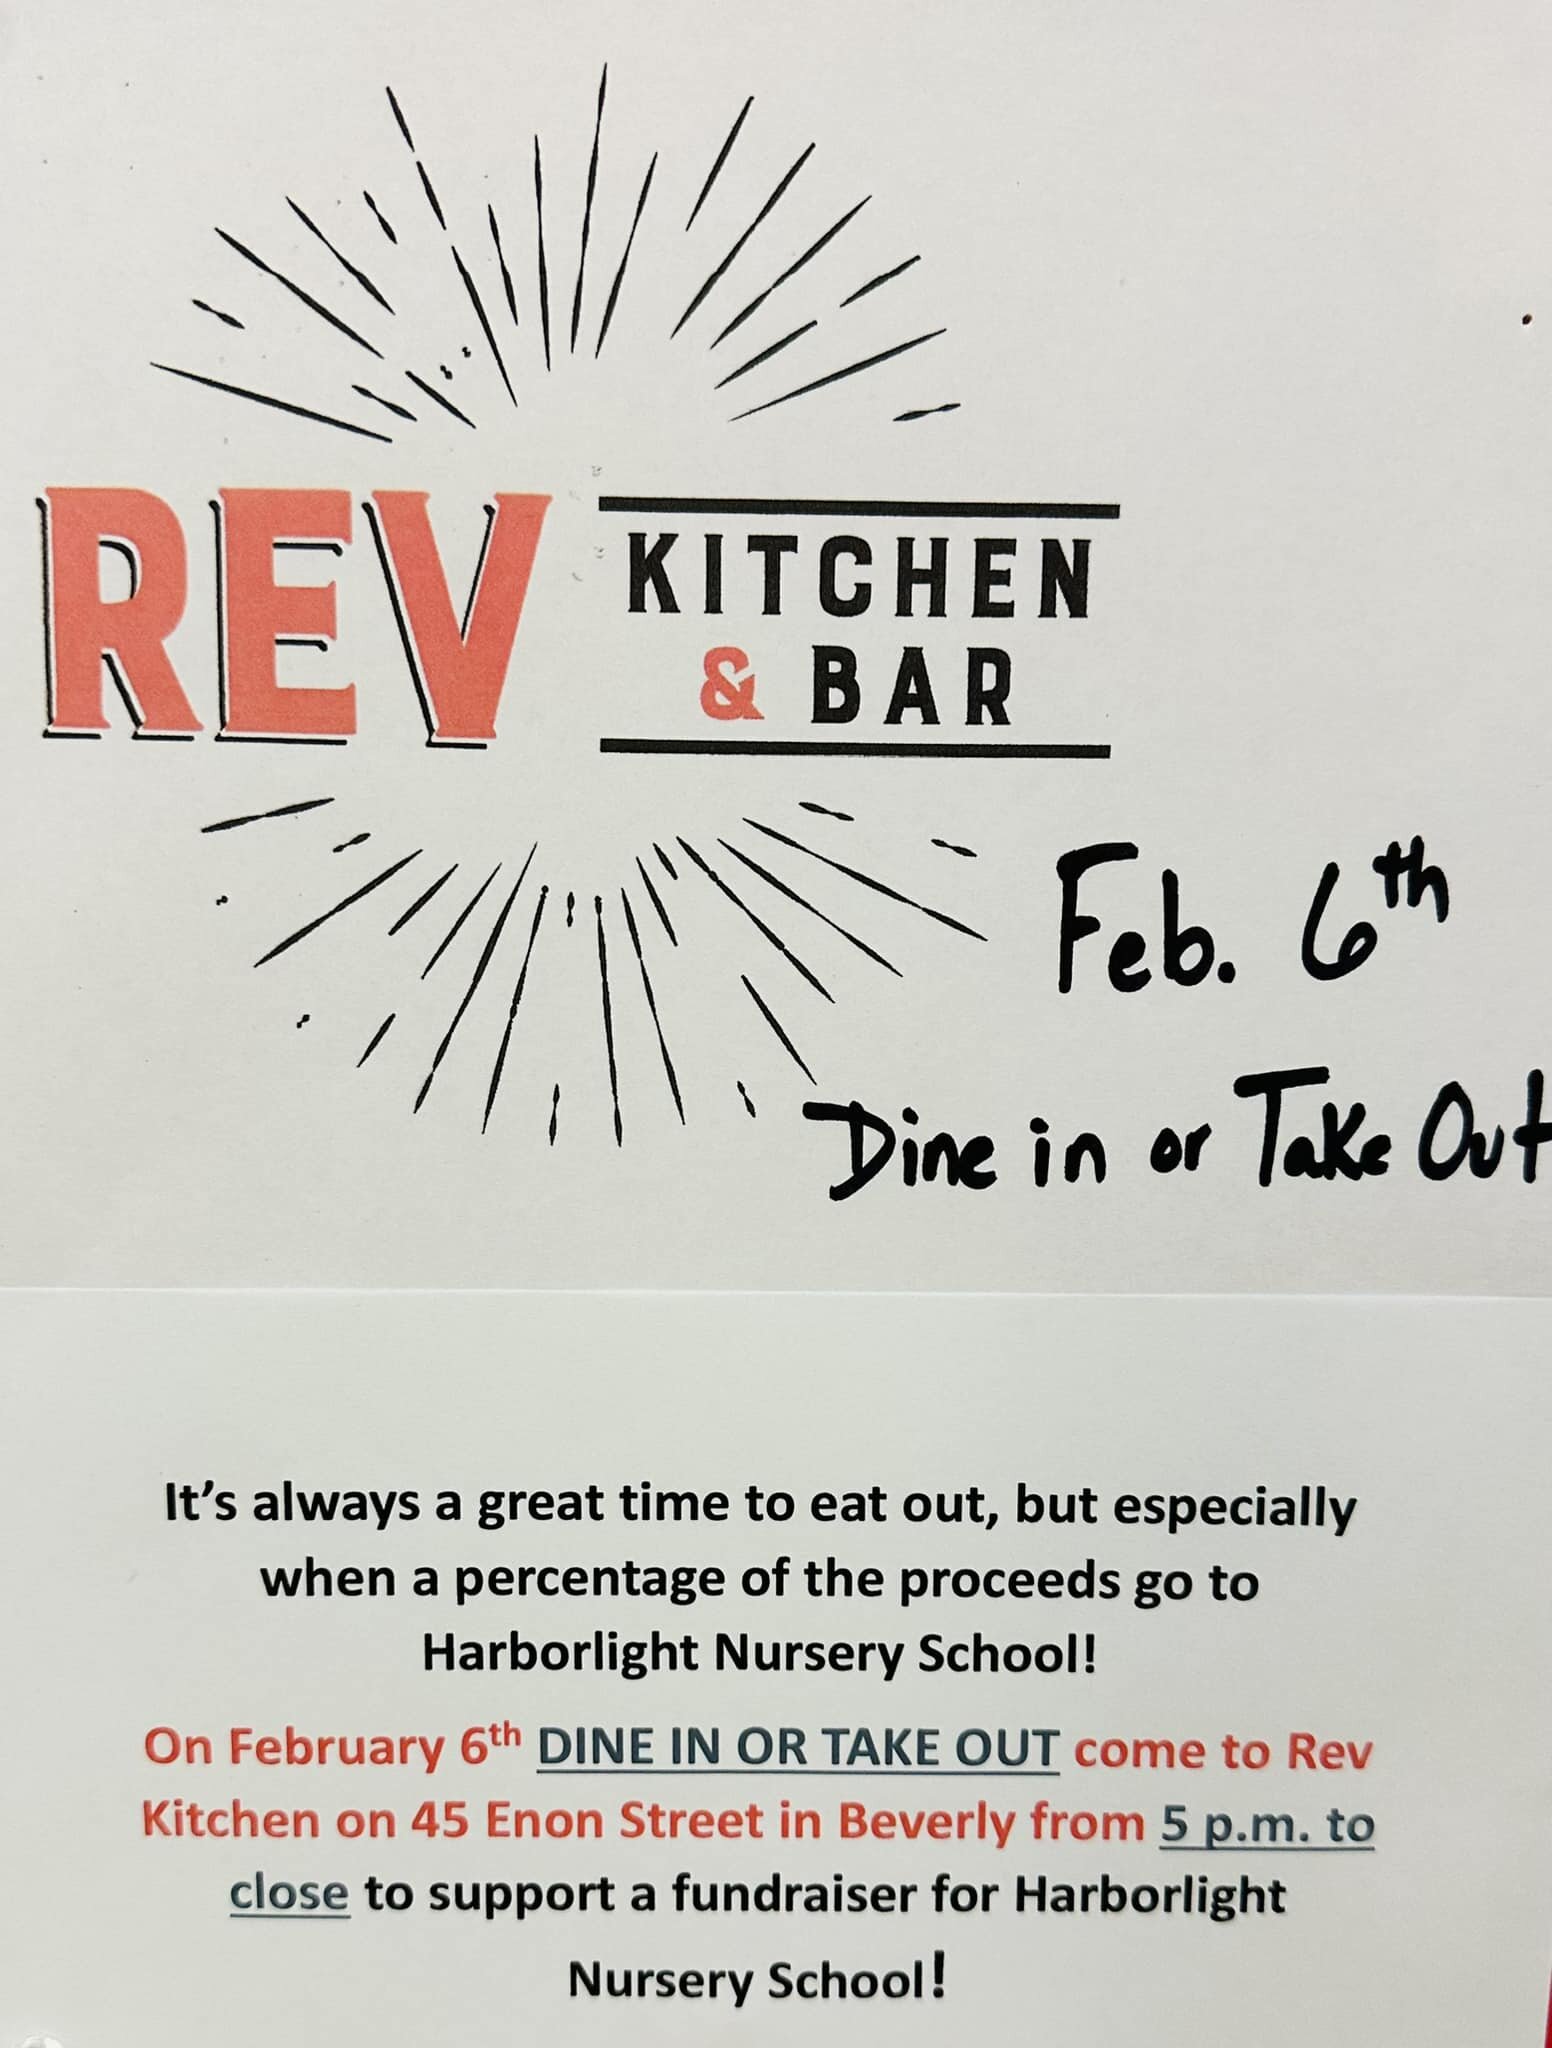 Come to Rev Kitchen tomorrow, Tuesday, February 6 to support our Harborlight Nursery School&rsquo;s fundraiser. Whether it&rsquo;s dine in or takeout we&rsquo;re making dinner easy.
Please share this post to spread the word to local friends and famil